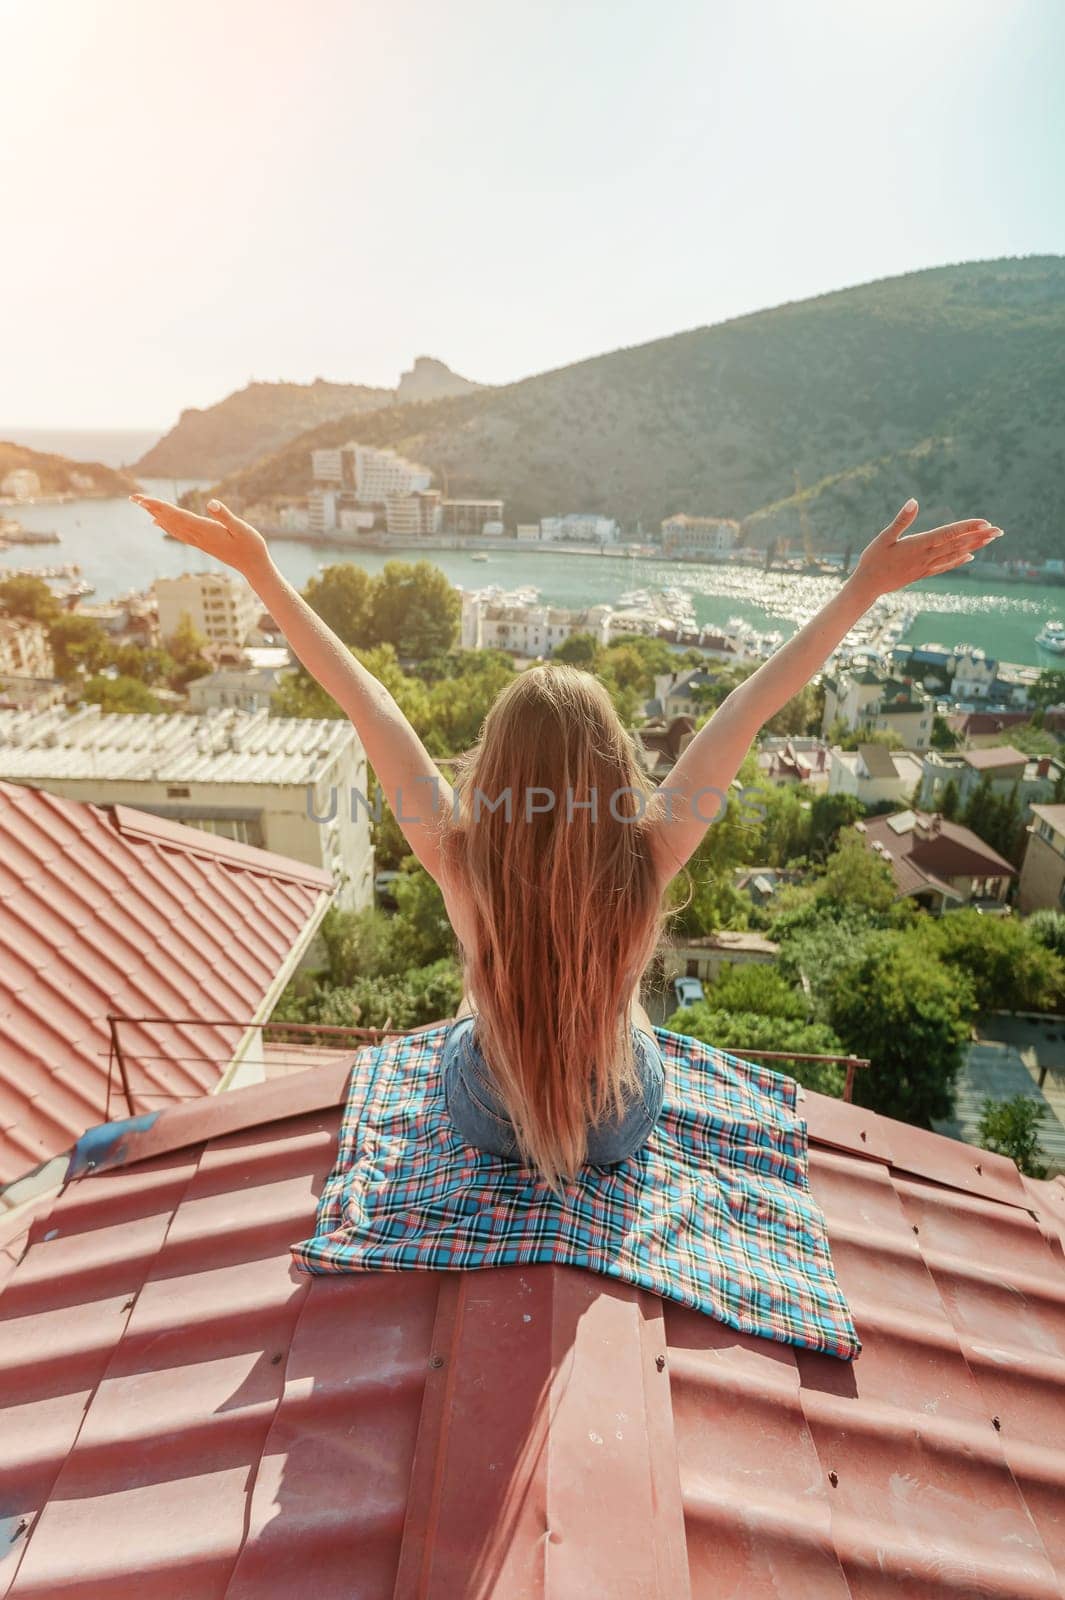 Woman sits on rooftop with outstretched arms, enjoys town view and sea mountains. Peaceful rooftop relaxation. Below her, there is a town with several boats visible in the water by Matiunina